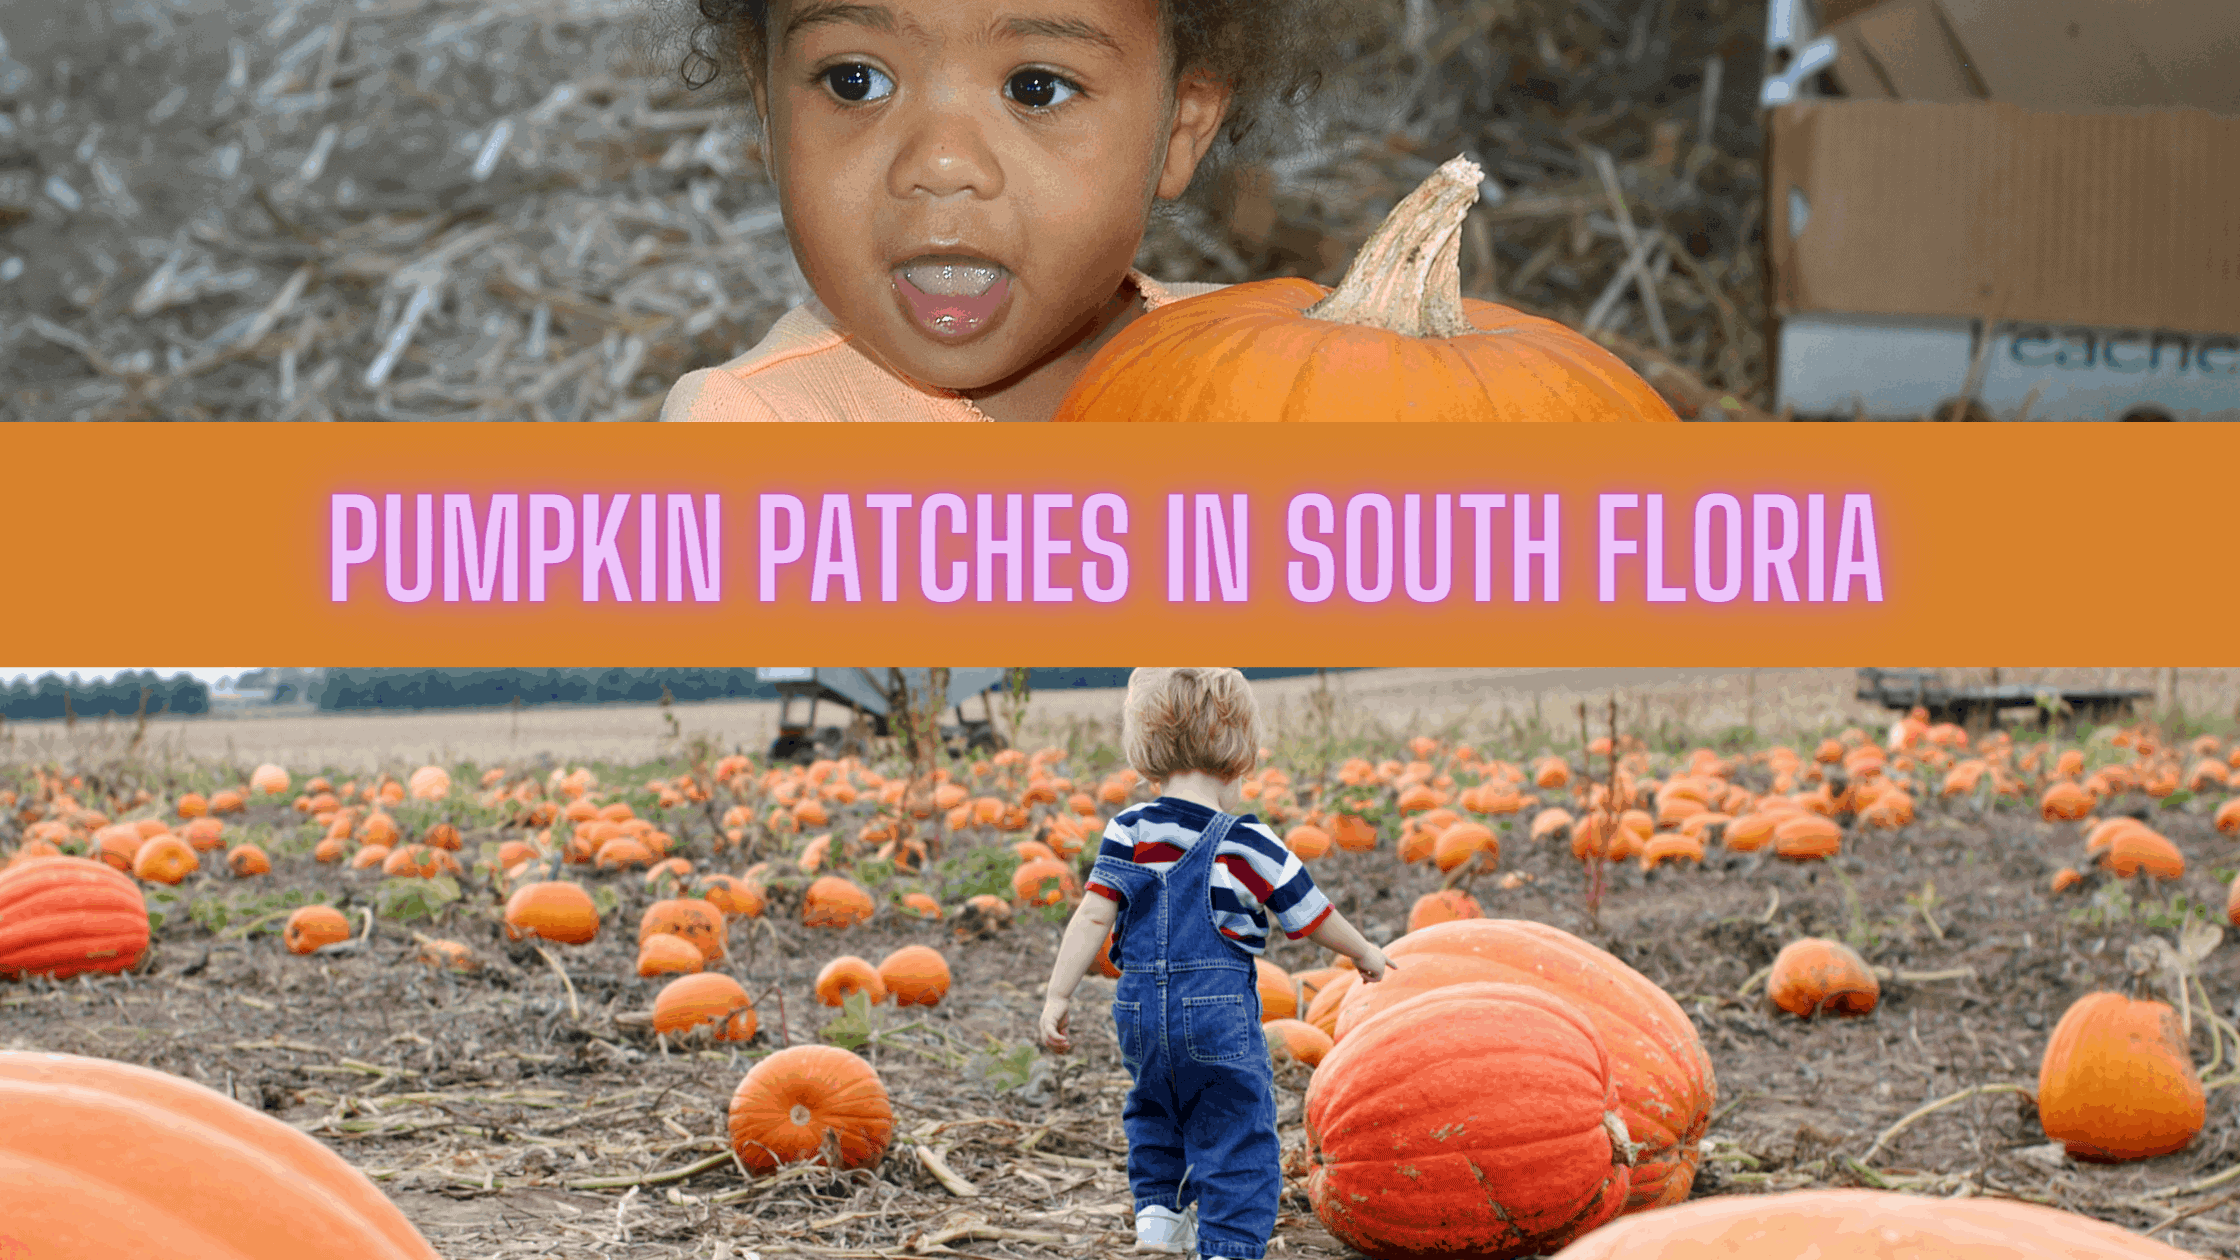 Pumpkin Patches in South Florida